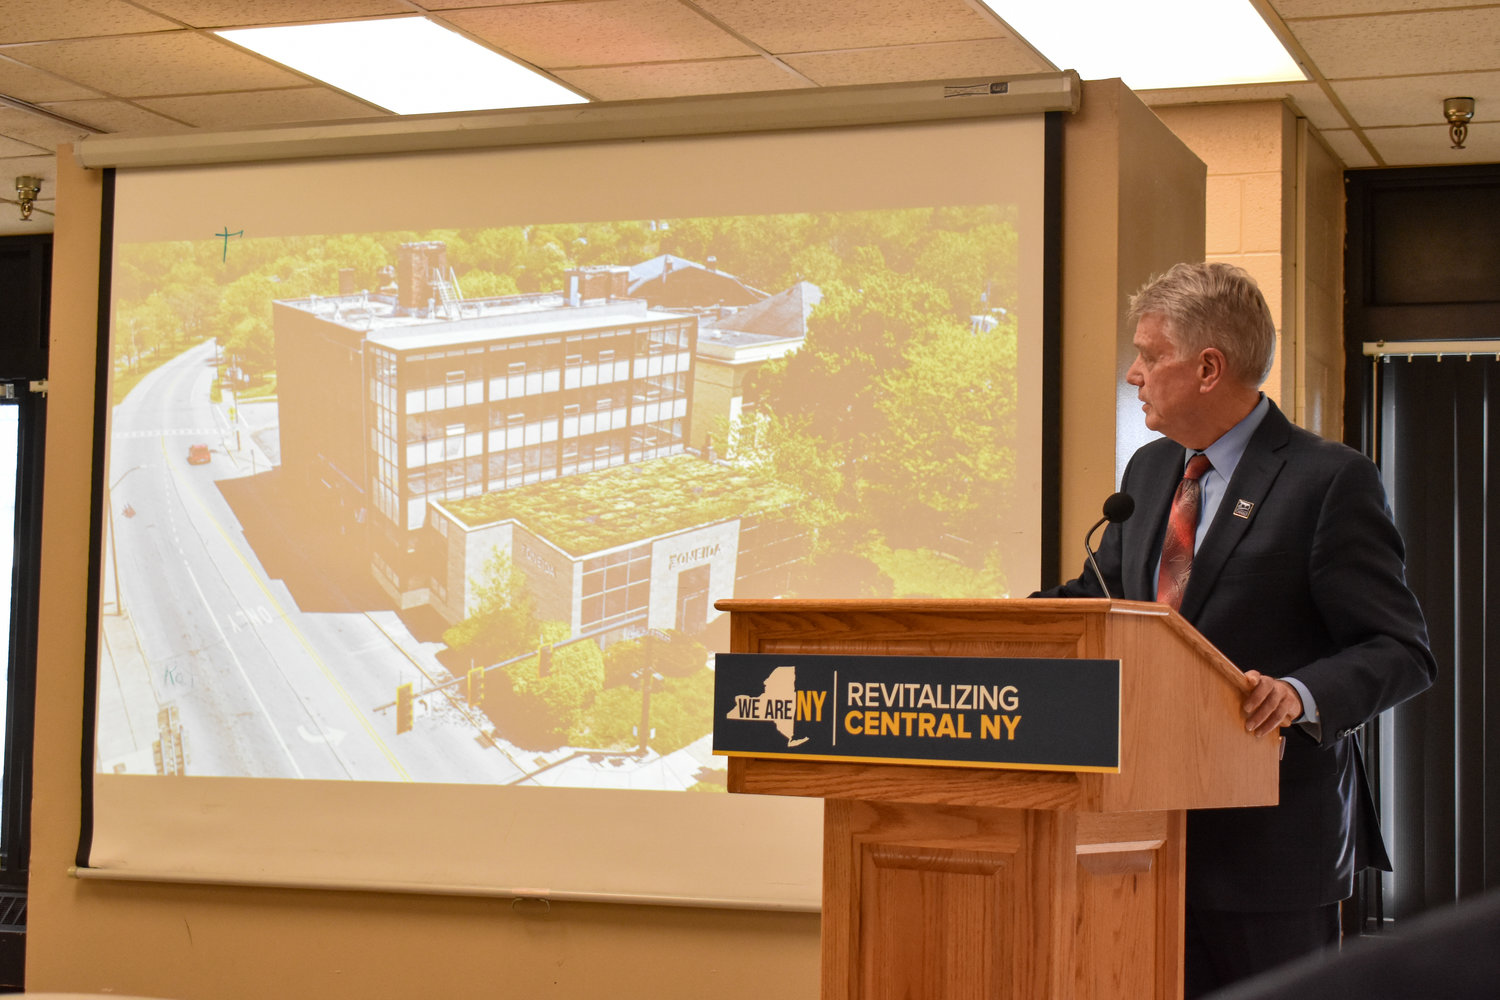 New York State Canal Corporation Director Brian Stratton announced the eight projects to be awarded Downtown Revitalization Initiative (DRI) funding in the City of Oneida. Pictured is a rendering of a rehabilitated Hotel Oneida.